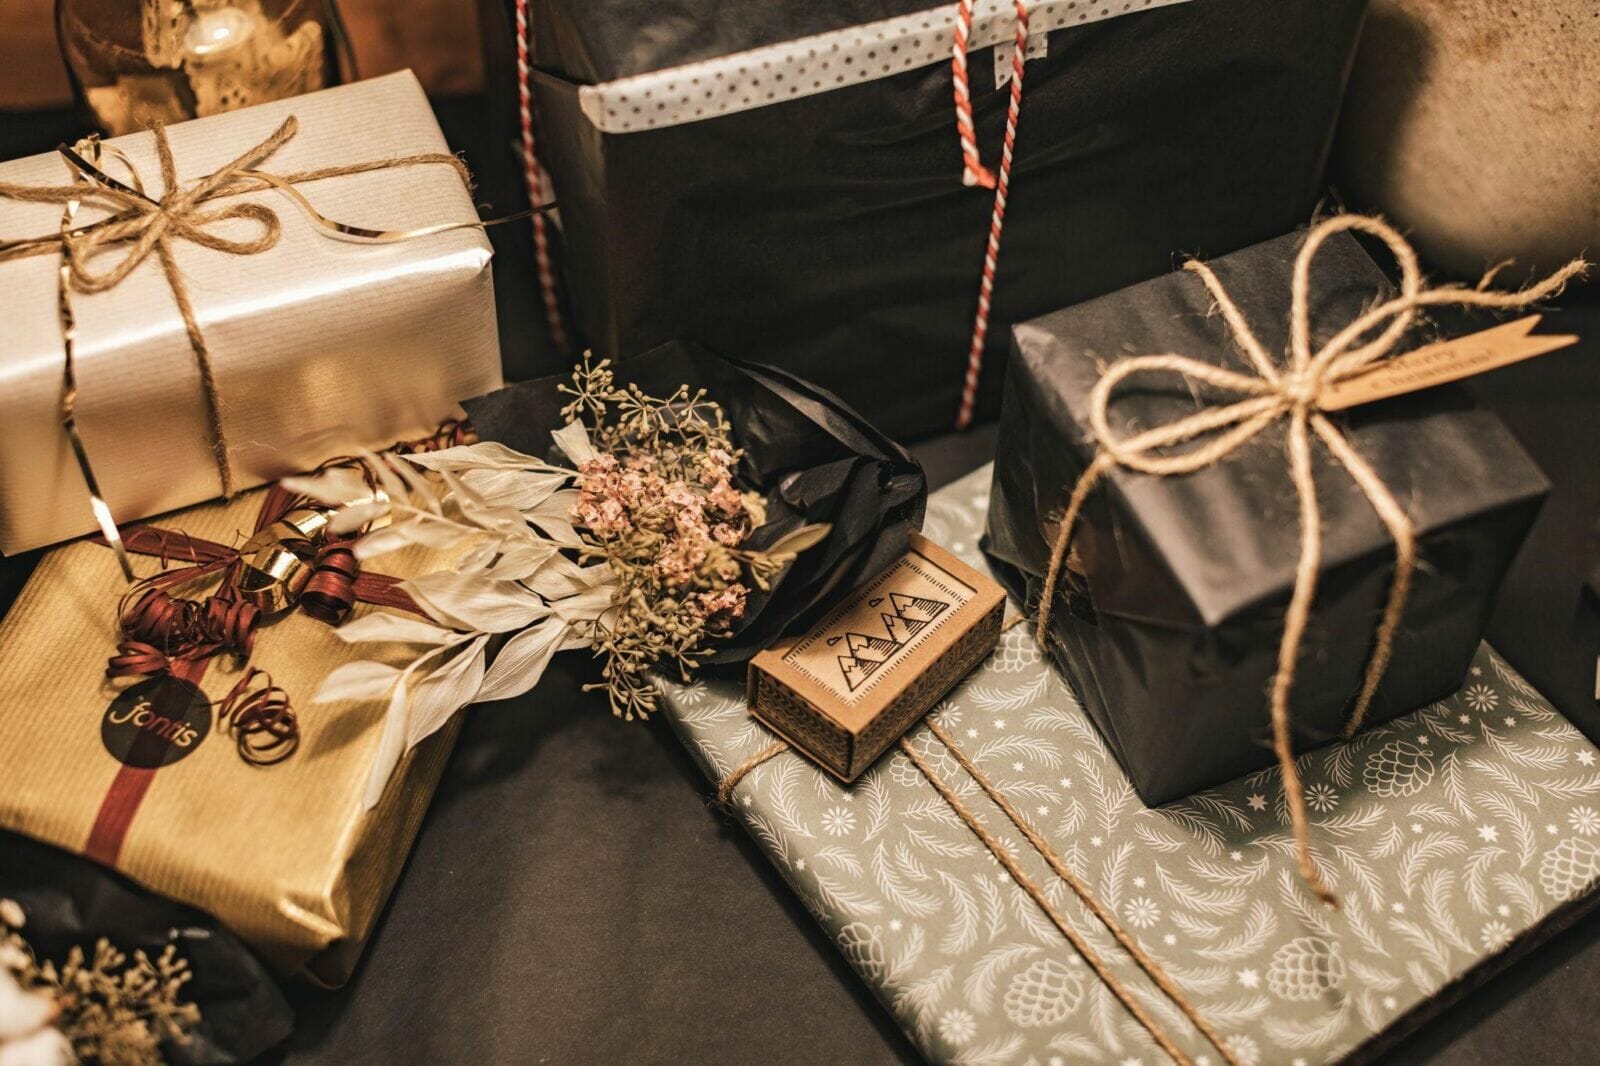 Tips to Consider When Finding the Perfect Gift for Someone Special